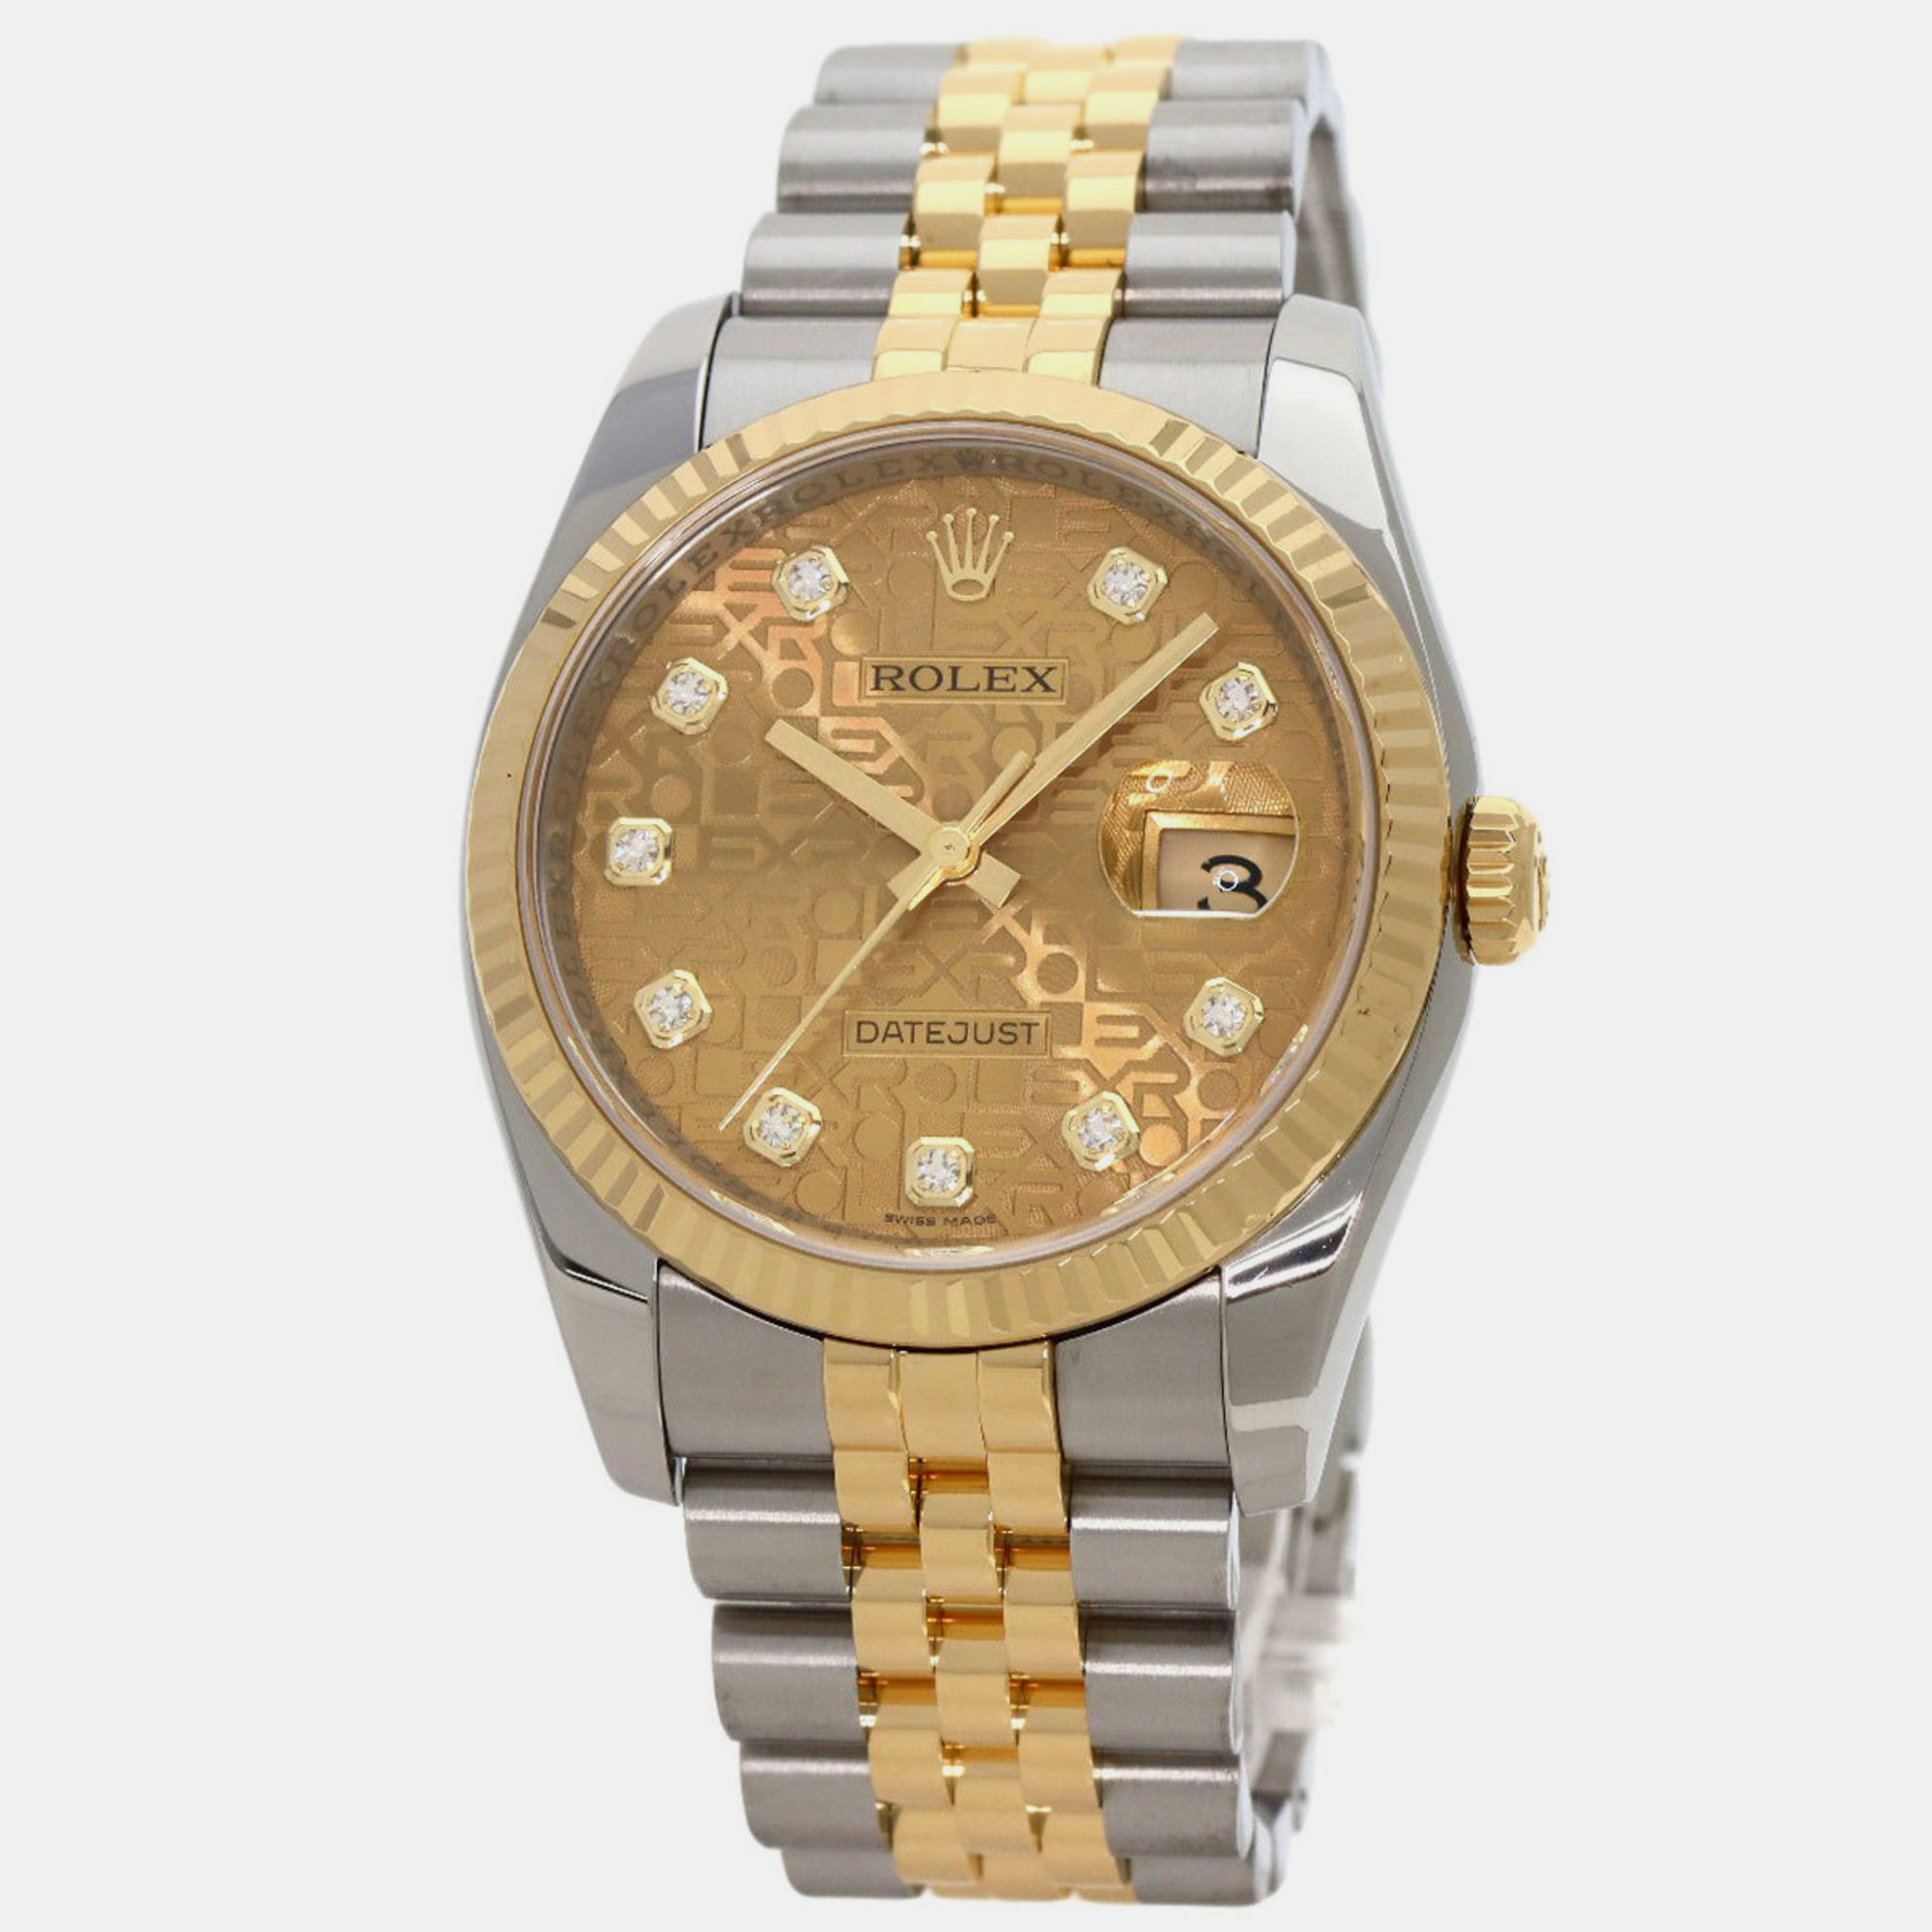 Rolex champagne 18k yellow gold stainless steel diamond datejust 116233g automatic men's wristwatch 36 mm